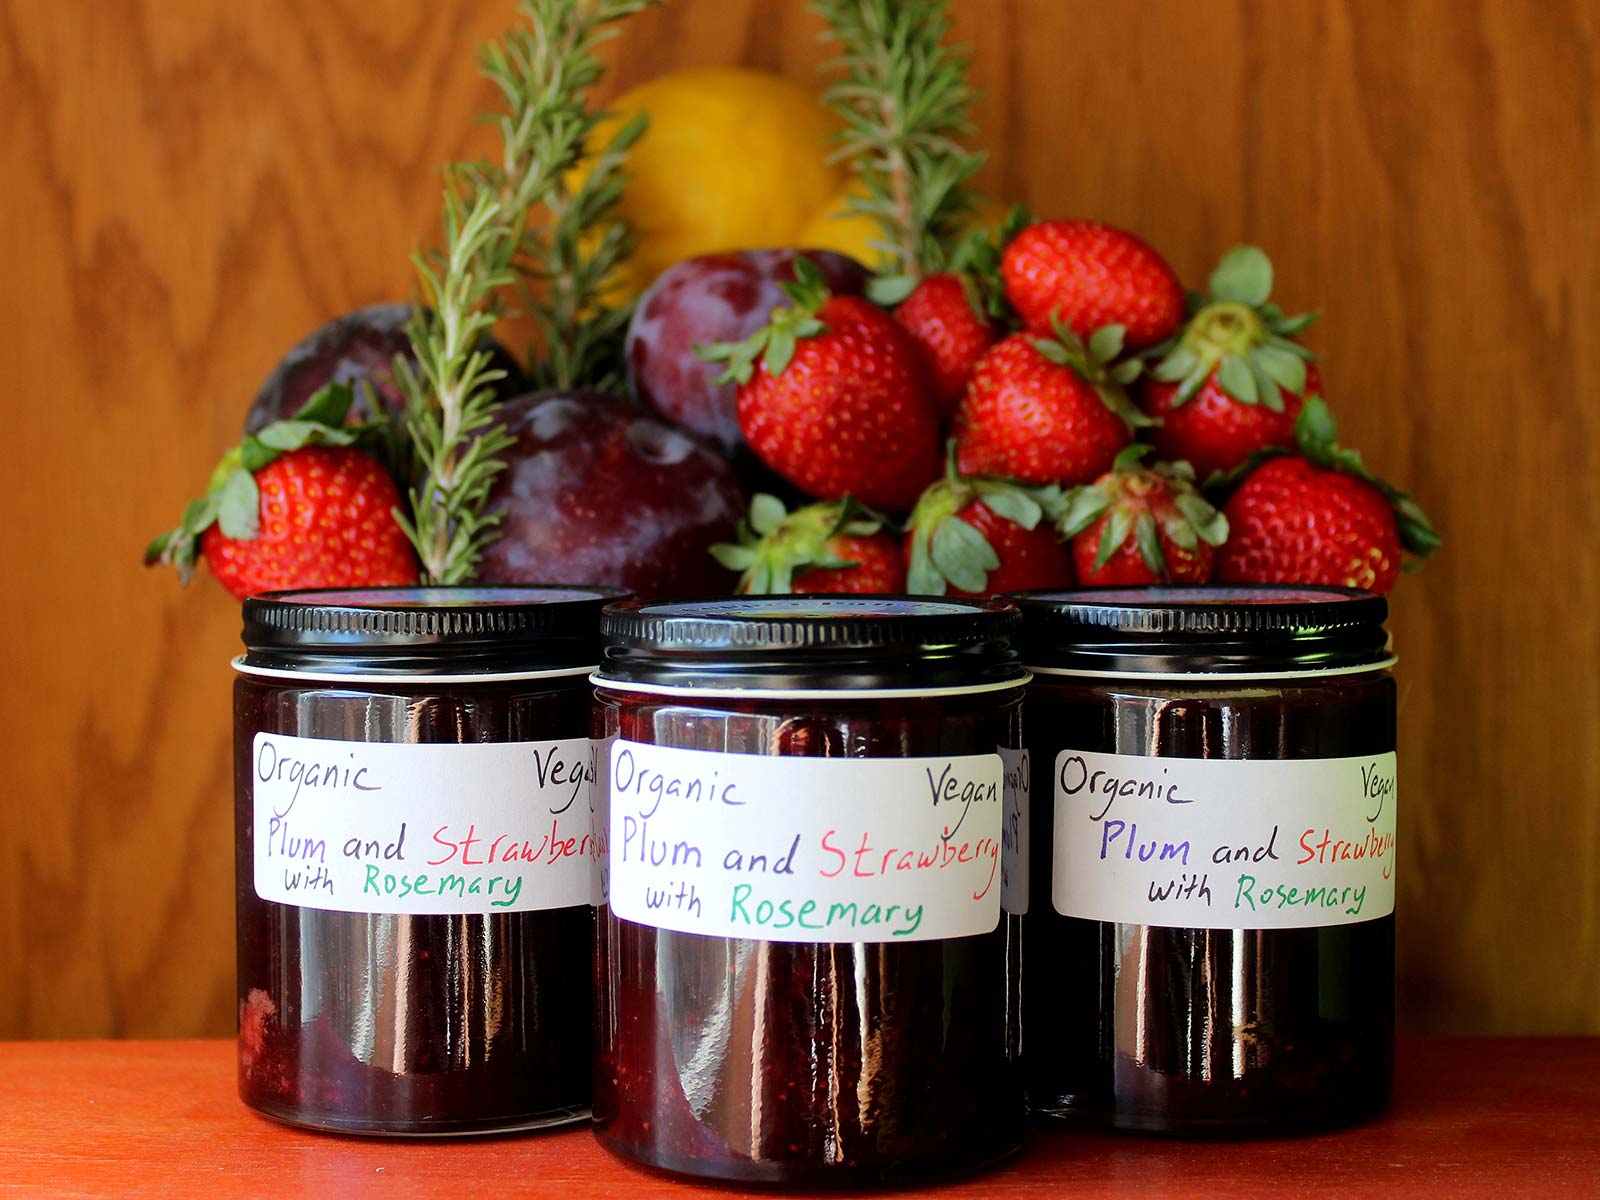 Plum and Strawberry Jam with Rosemary